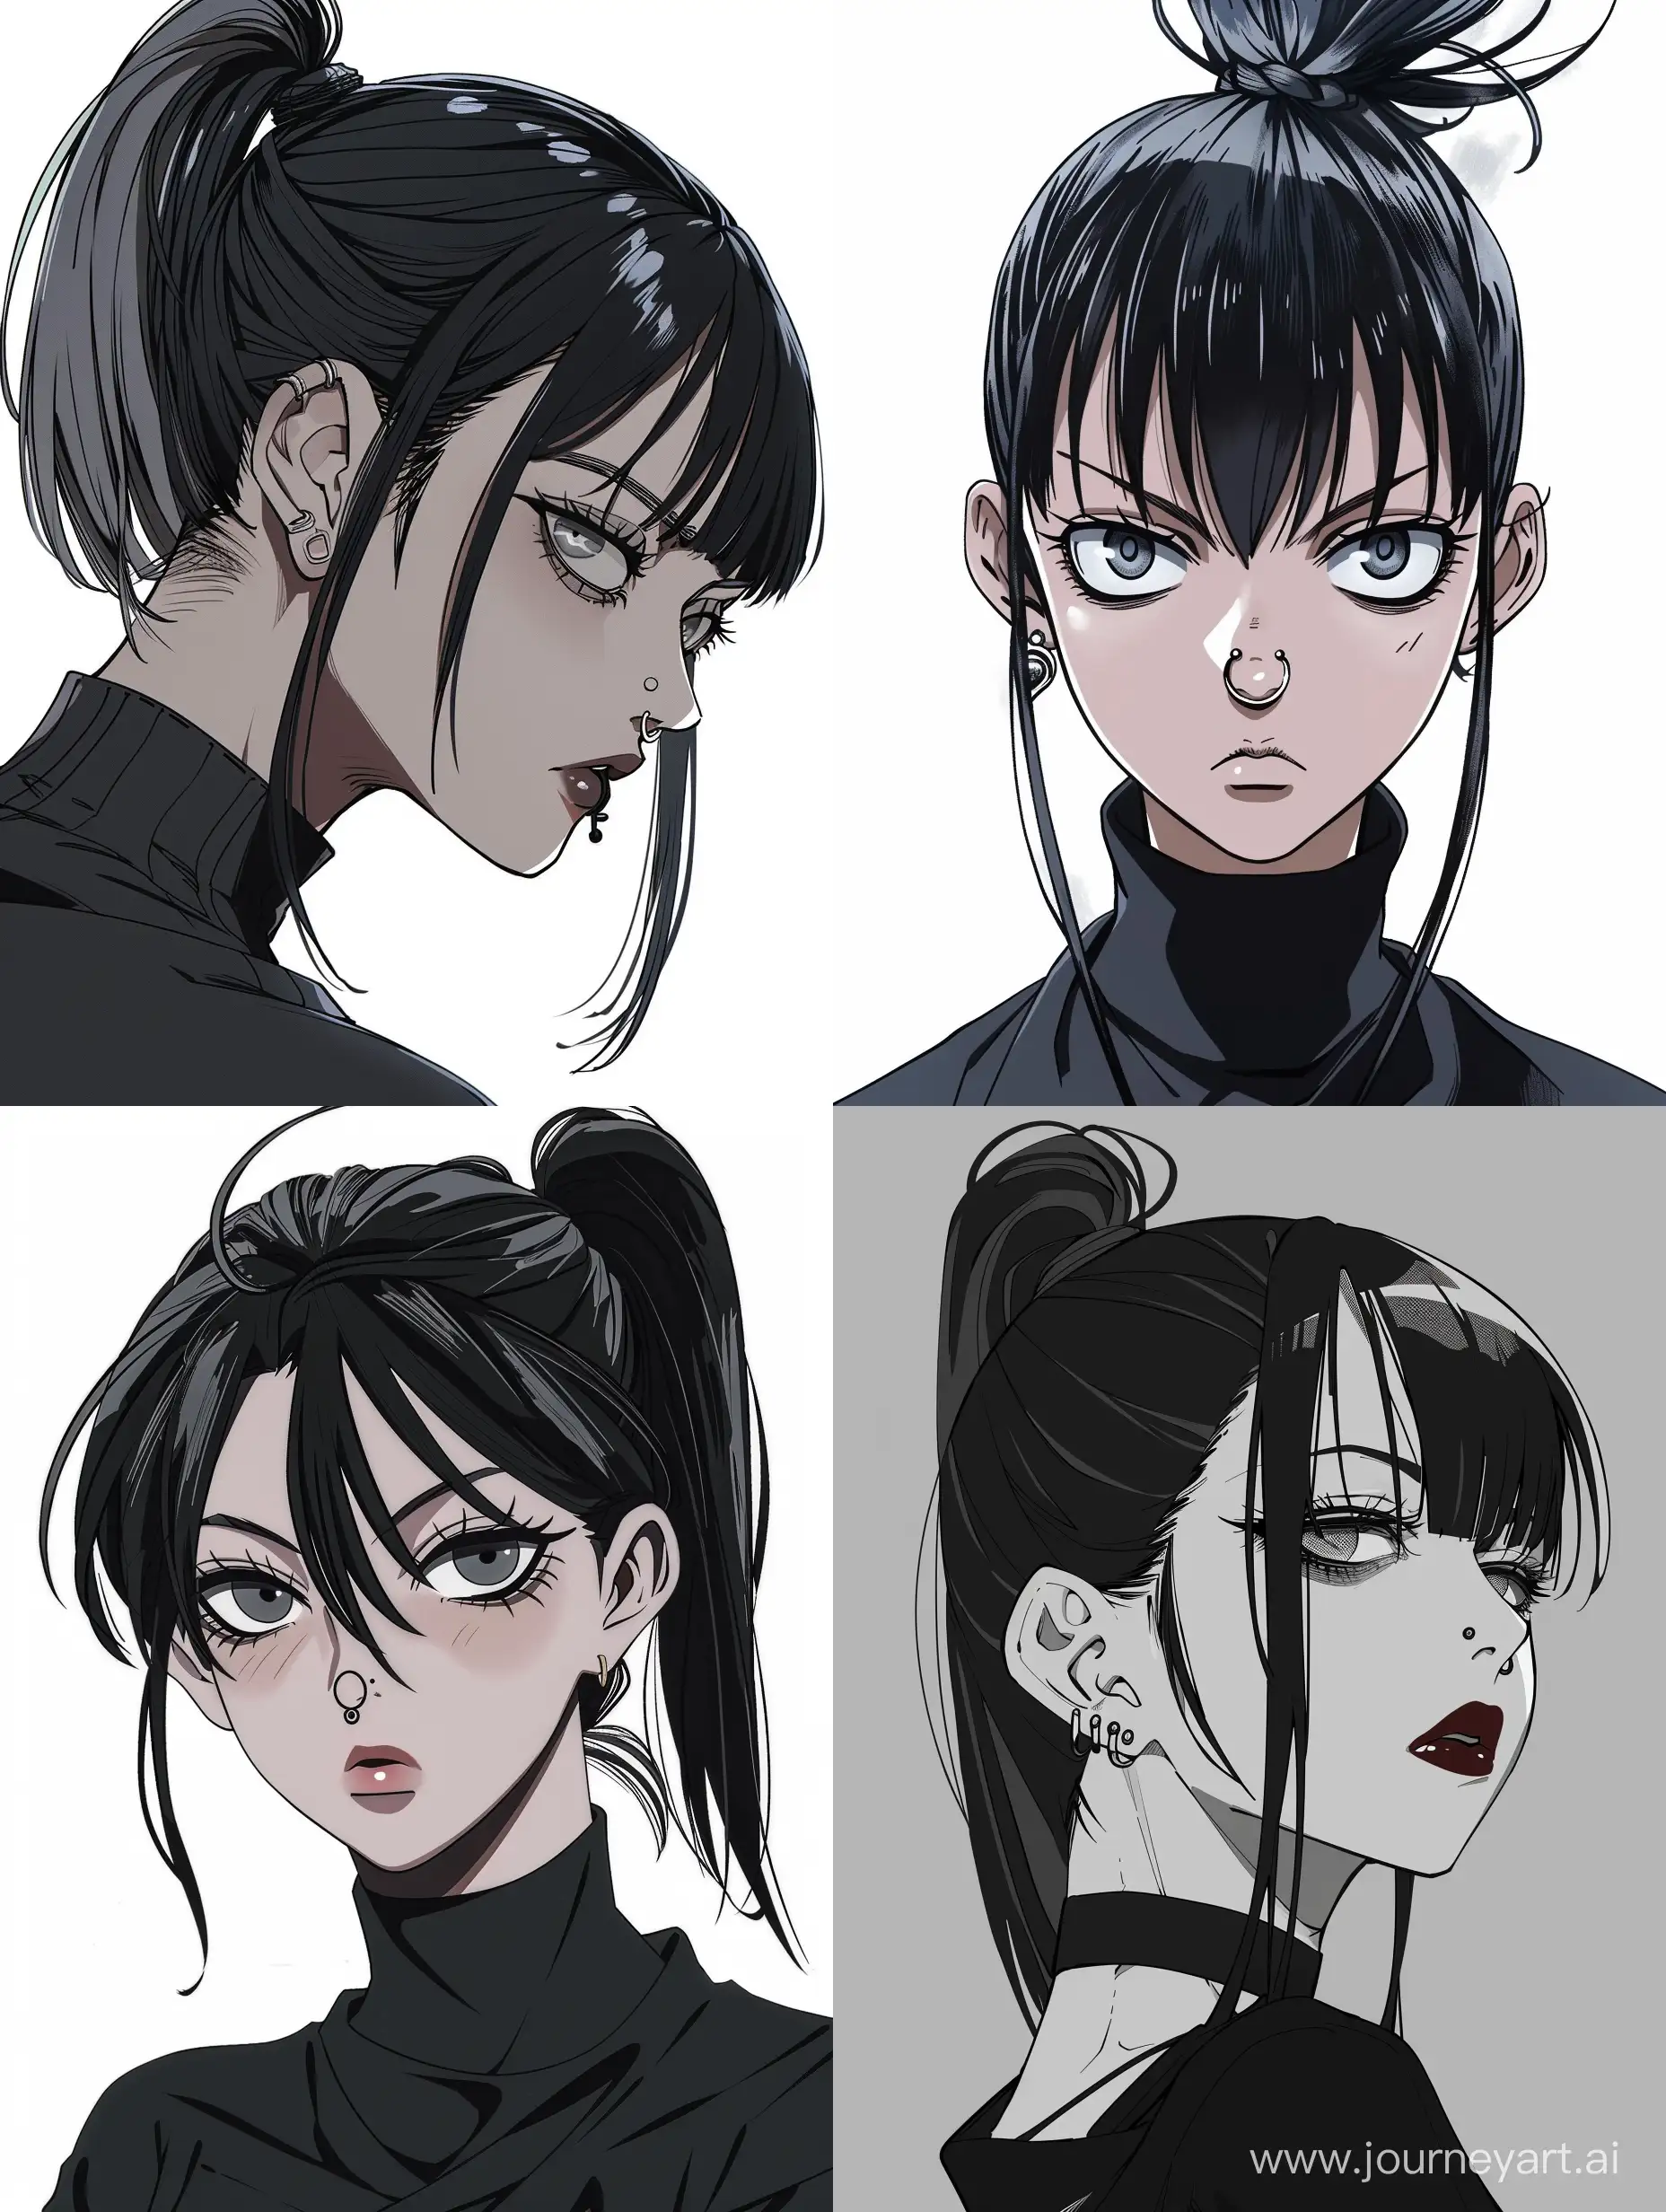 AnimeInspired-Athletic-Girl-with-Gray-Eyes-and-Black-Hair-in-Jujutsu-Kaisen-Style